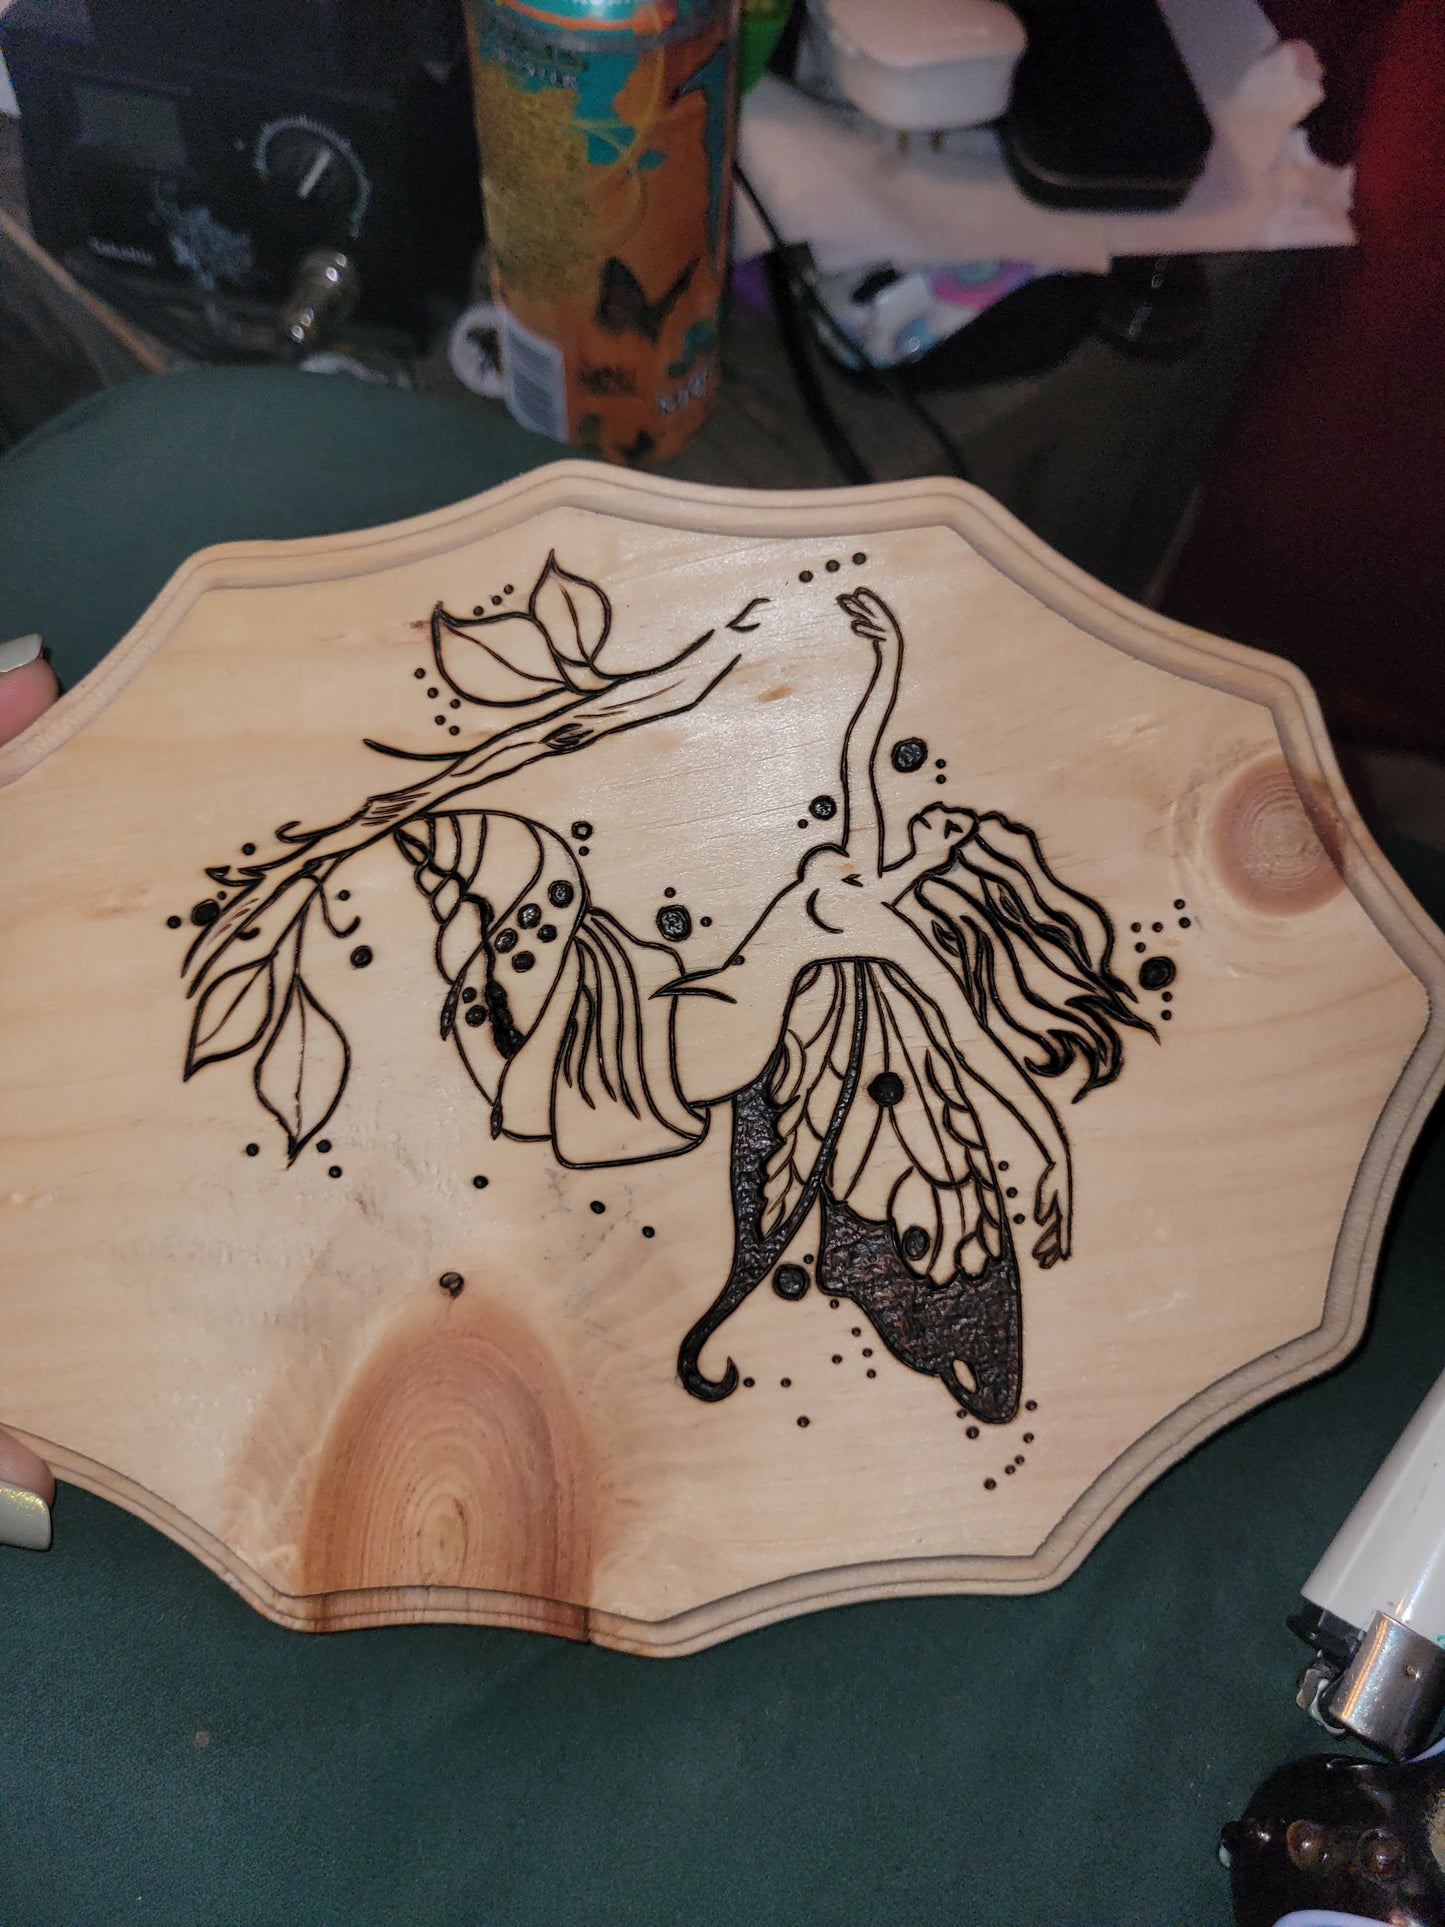 Blooming Fairy - 'Pyrographics by The Ragdoll Princess'